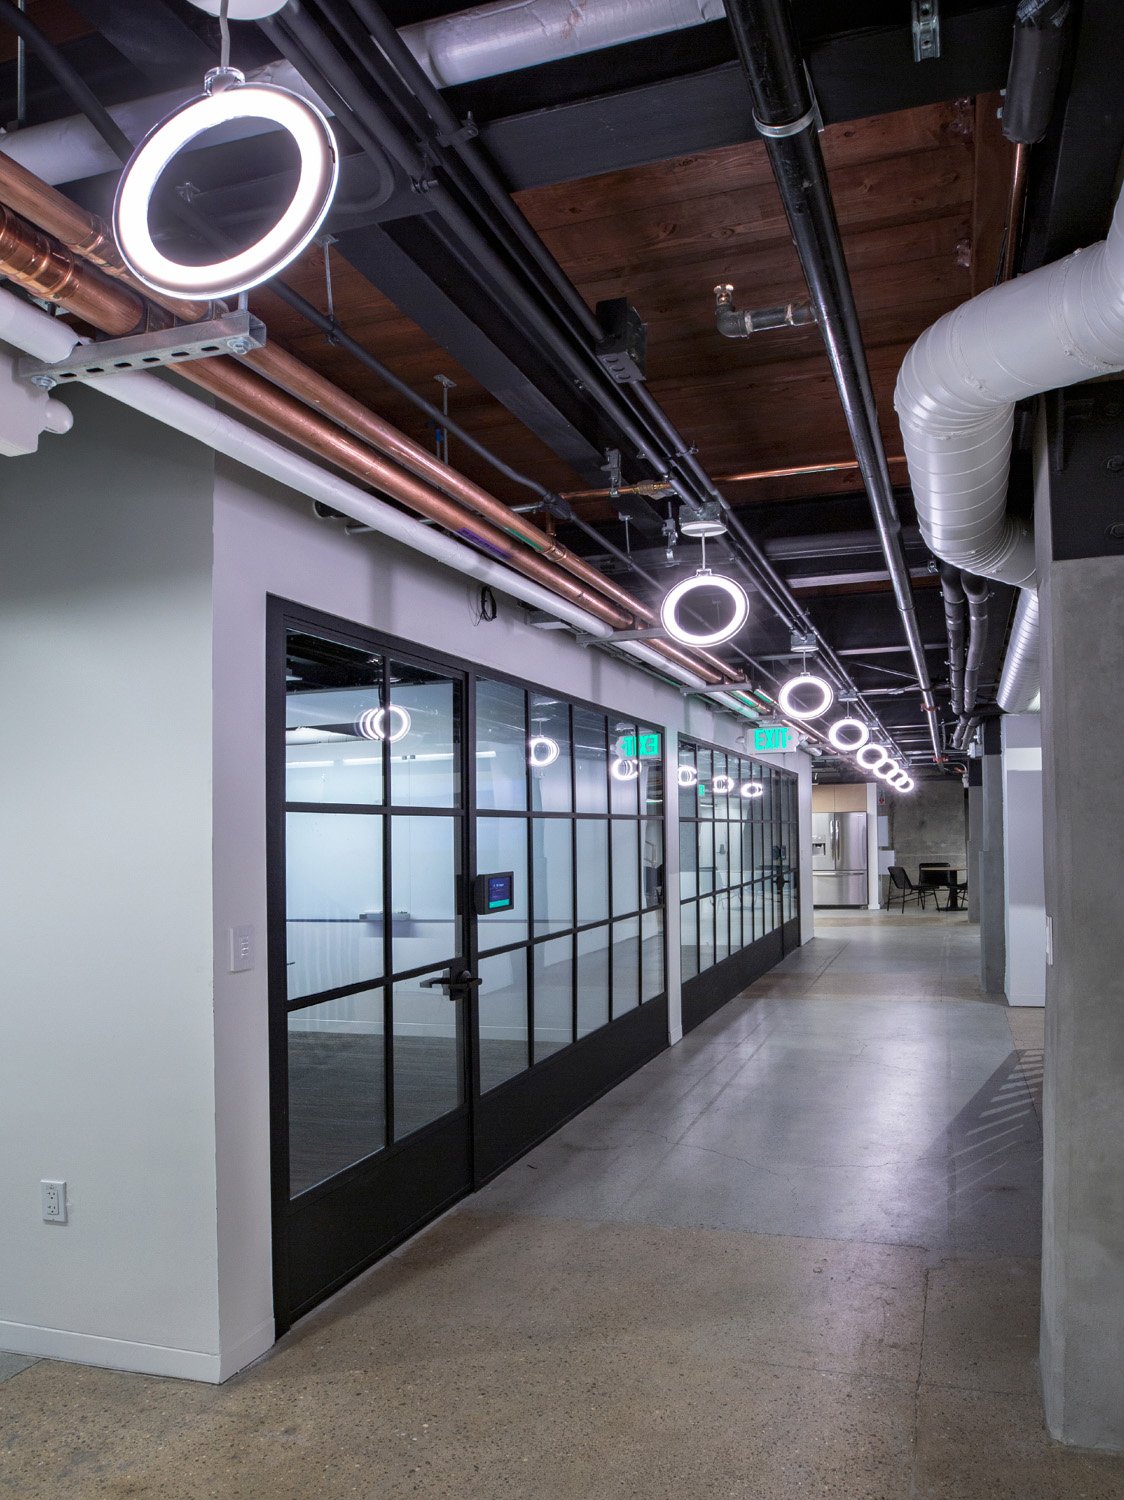 Throughout the building, the architectural lighting design with new lighting fixtures and other interventions are instrumental in transforming the interior from an electrical powerhouse to a humane and upl | Billy Hustace